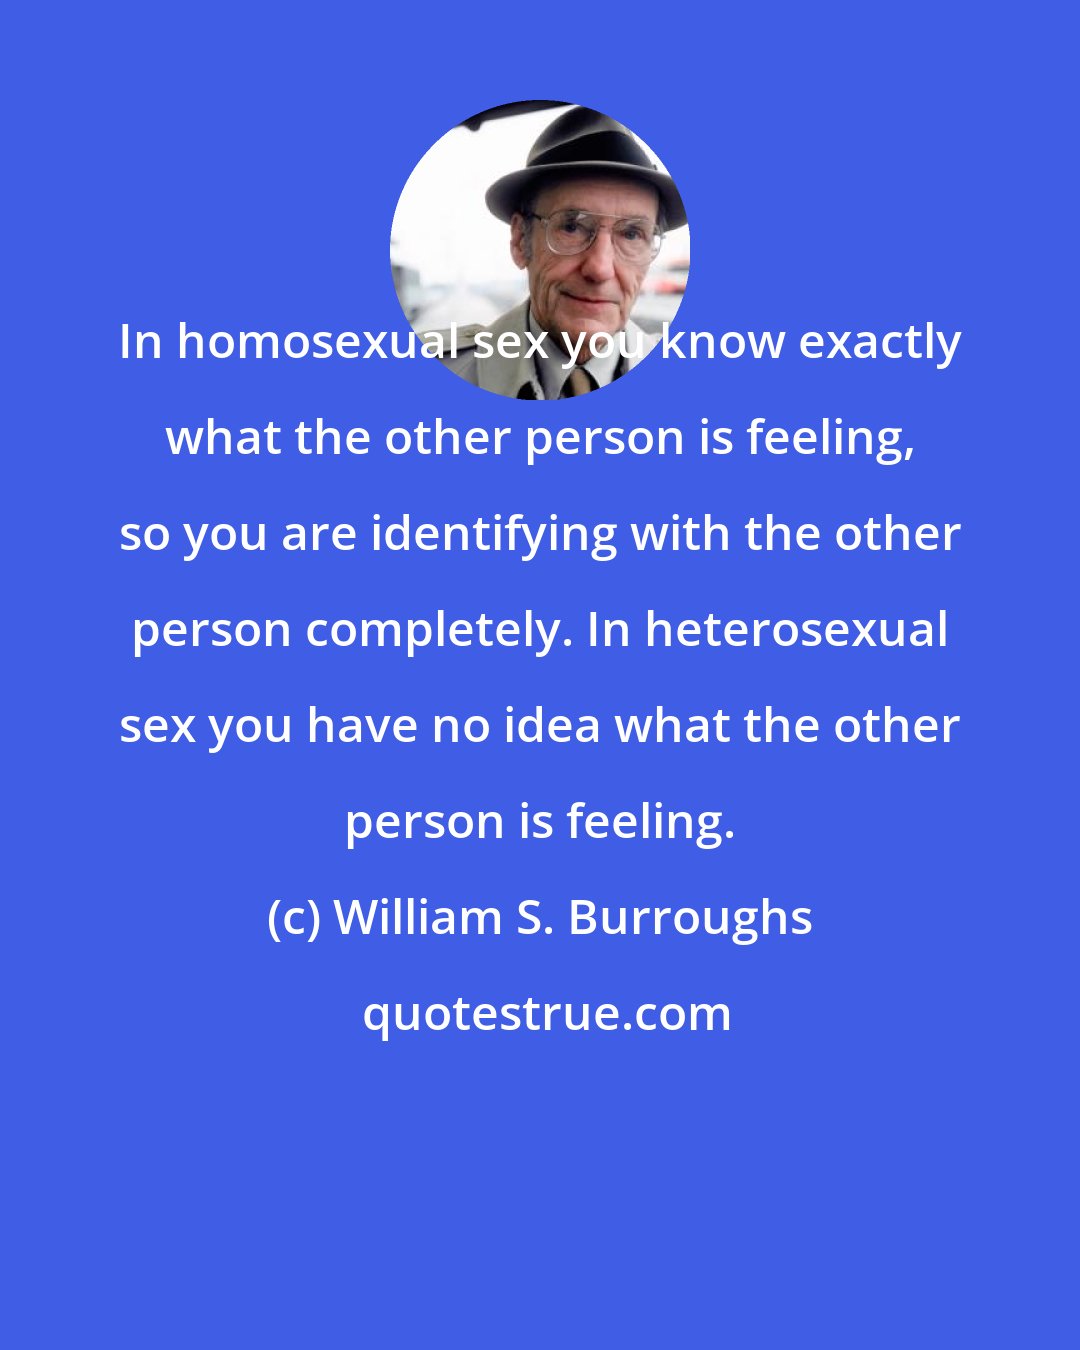 William S. Burroughs: In homosexual sex you know exactly what the other person is feeling, so you are identifying with the other person completely. In heterosexual sex you have no idea what the other person is feeling.